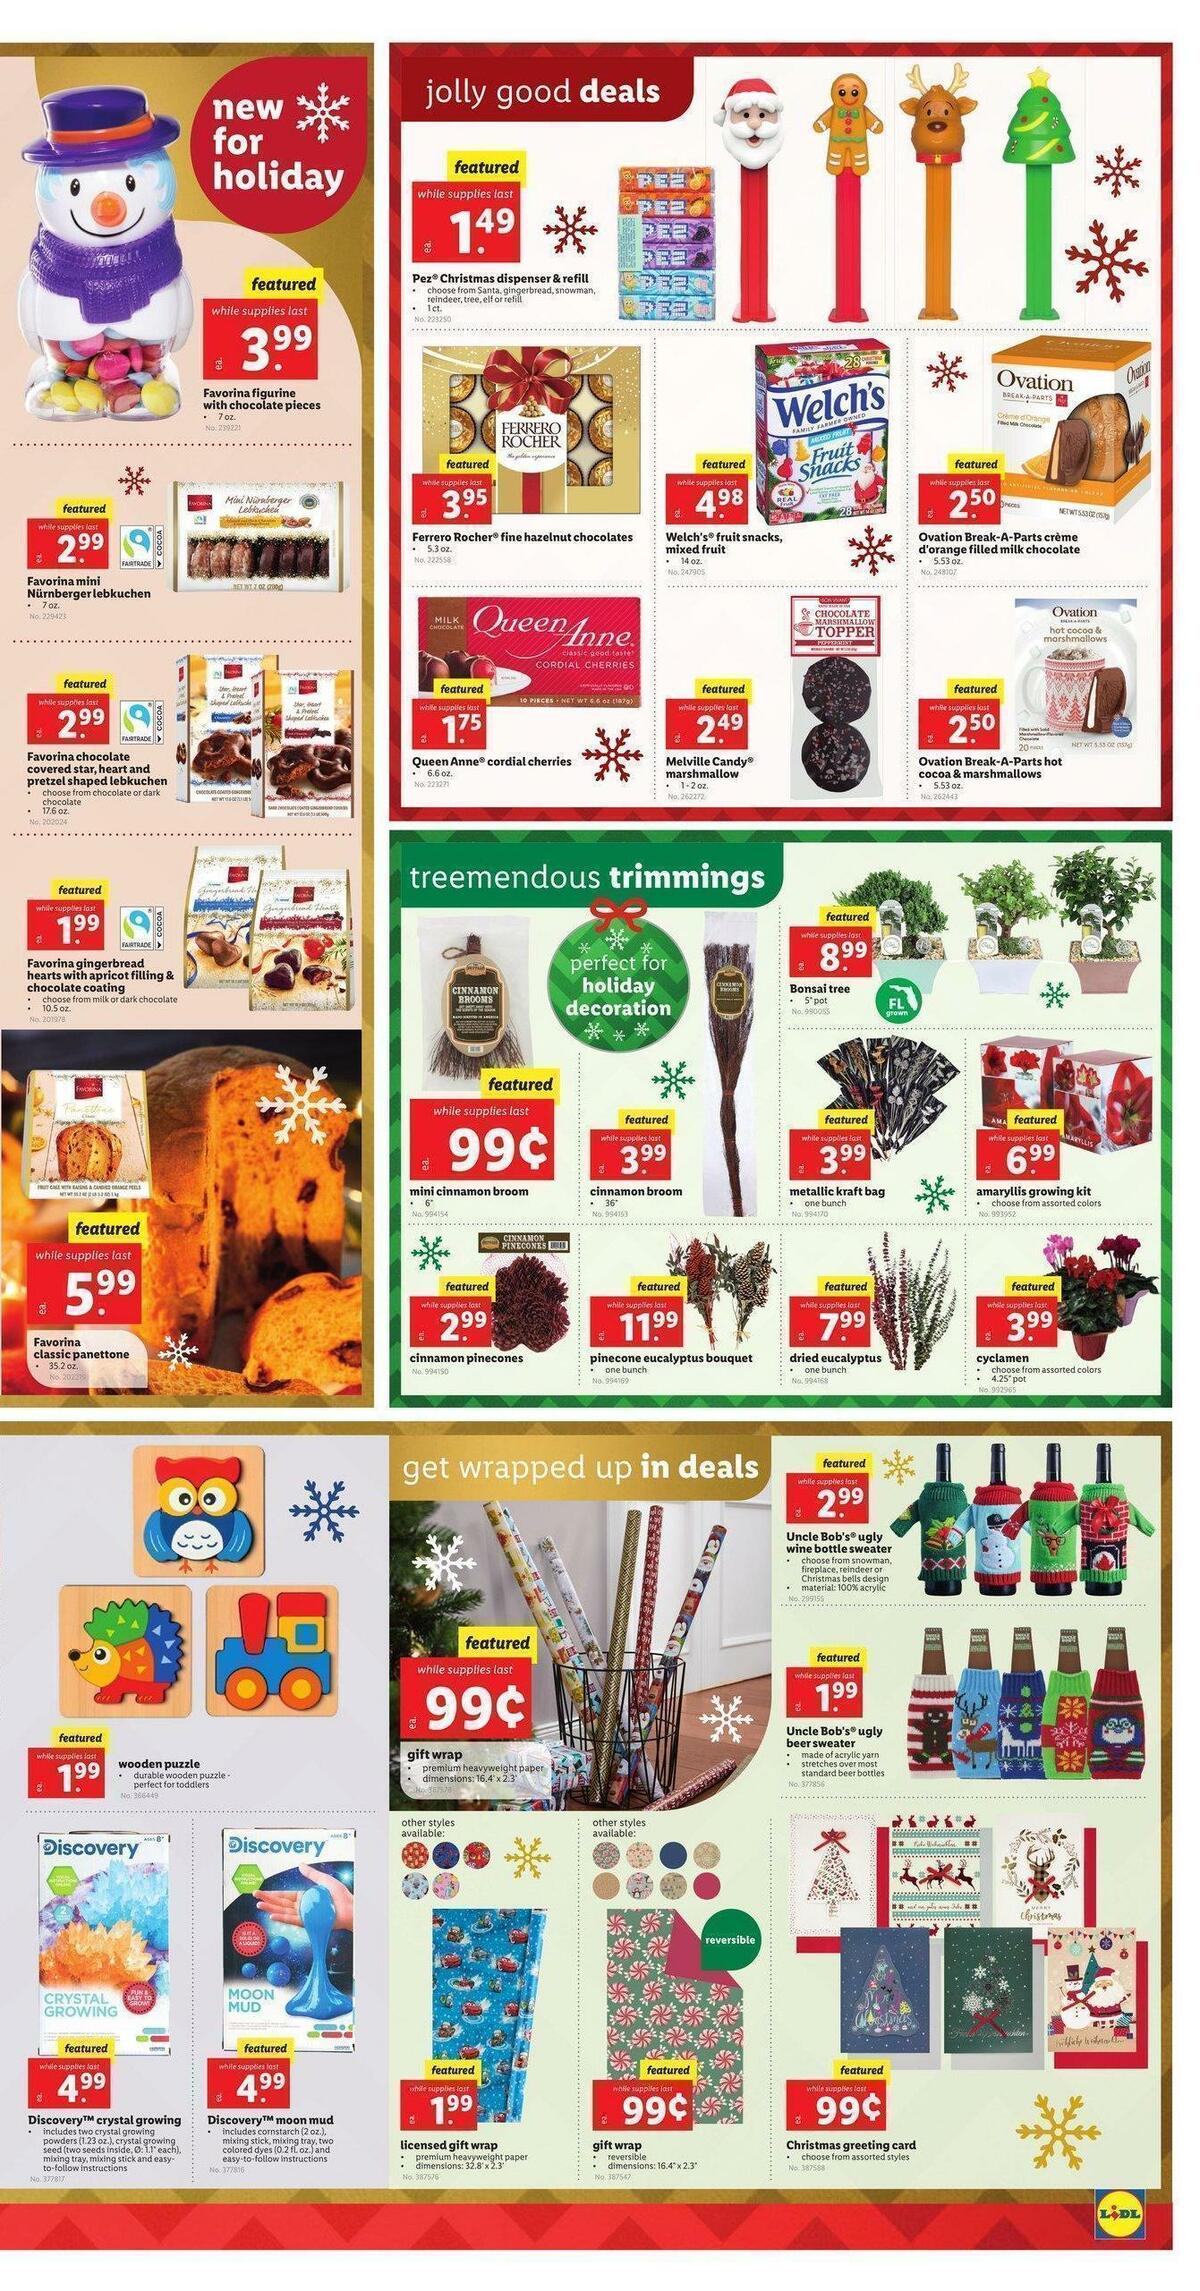 LIDL Weekly Ad from November 3